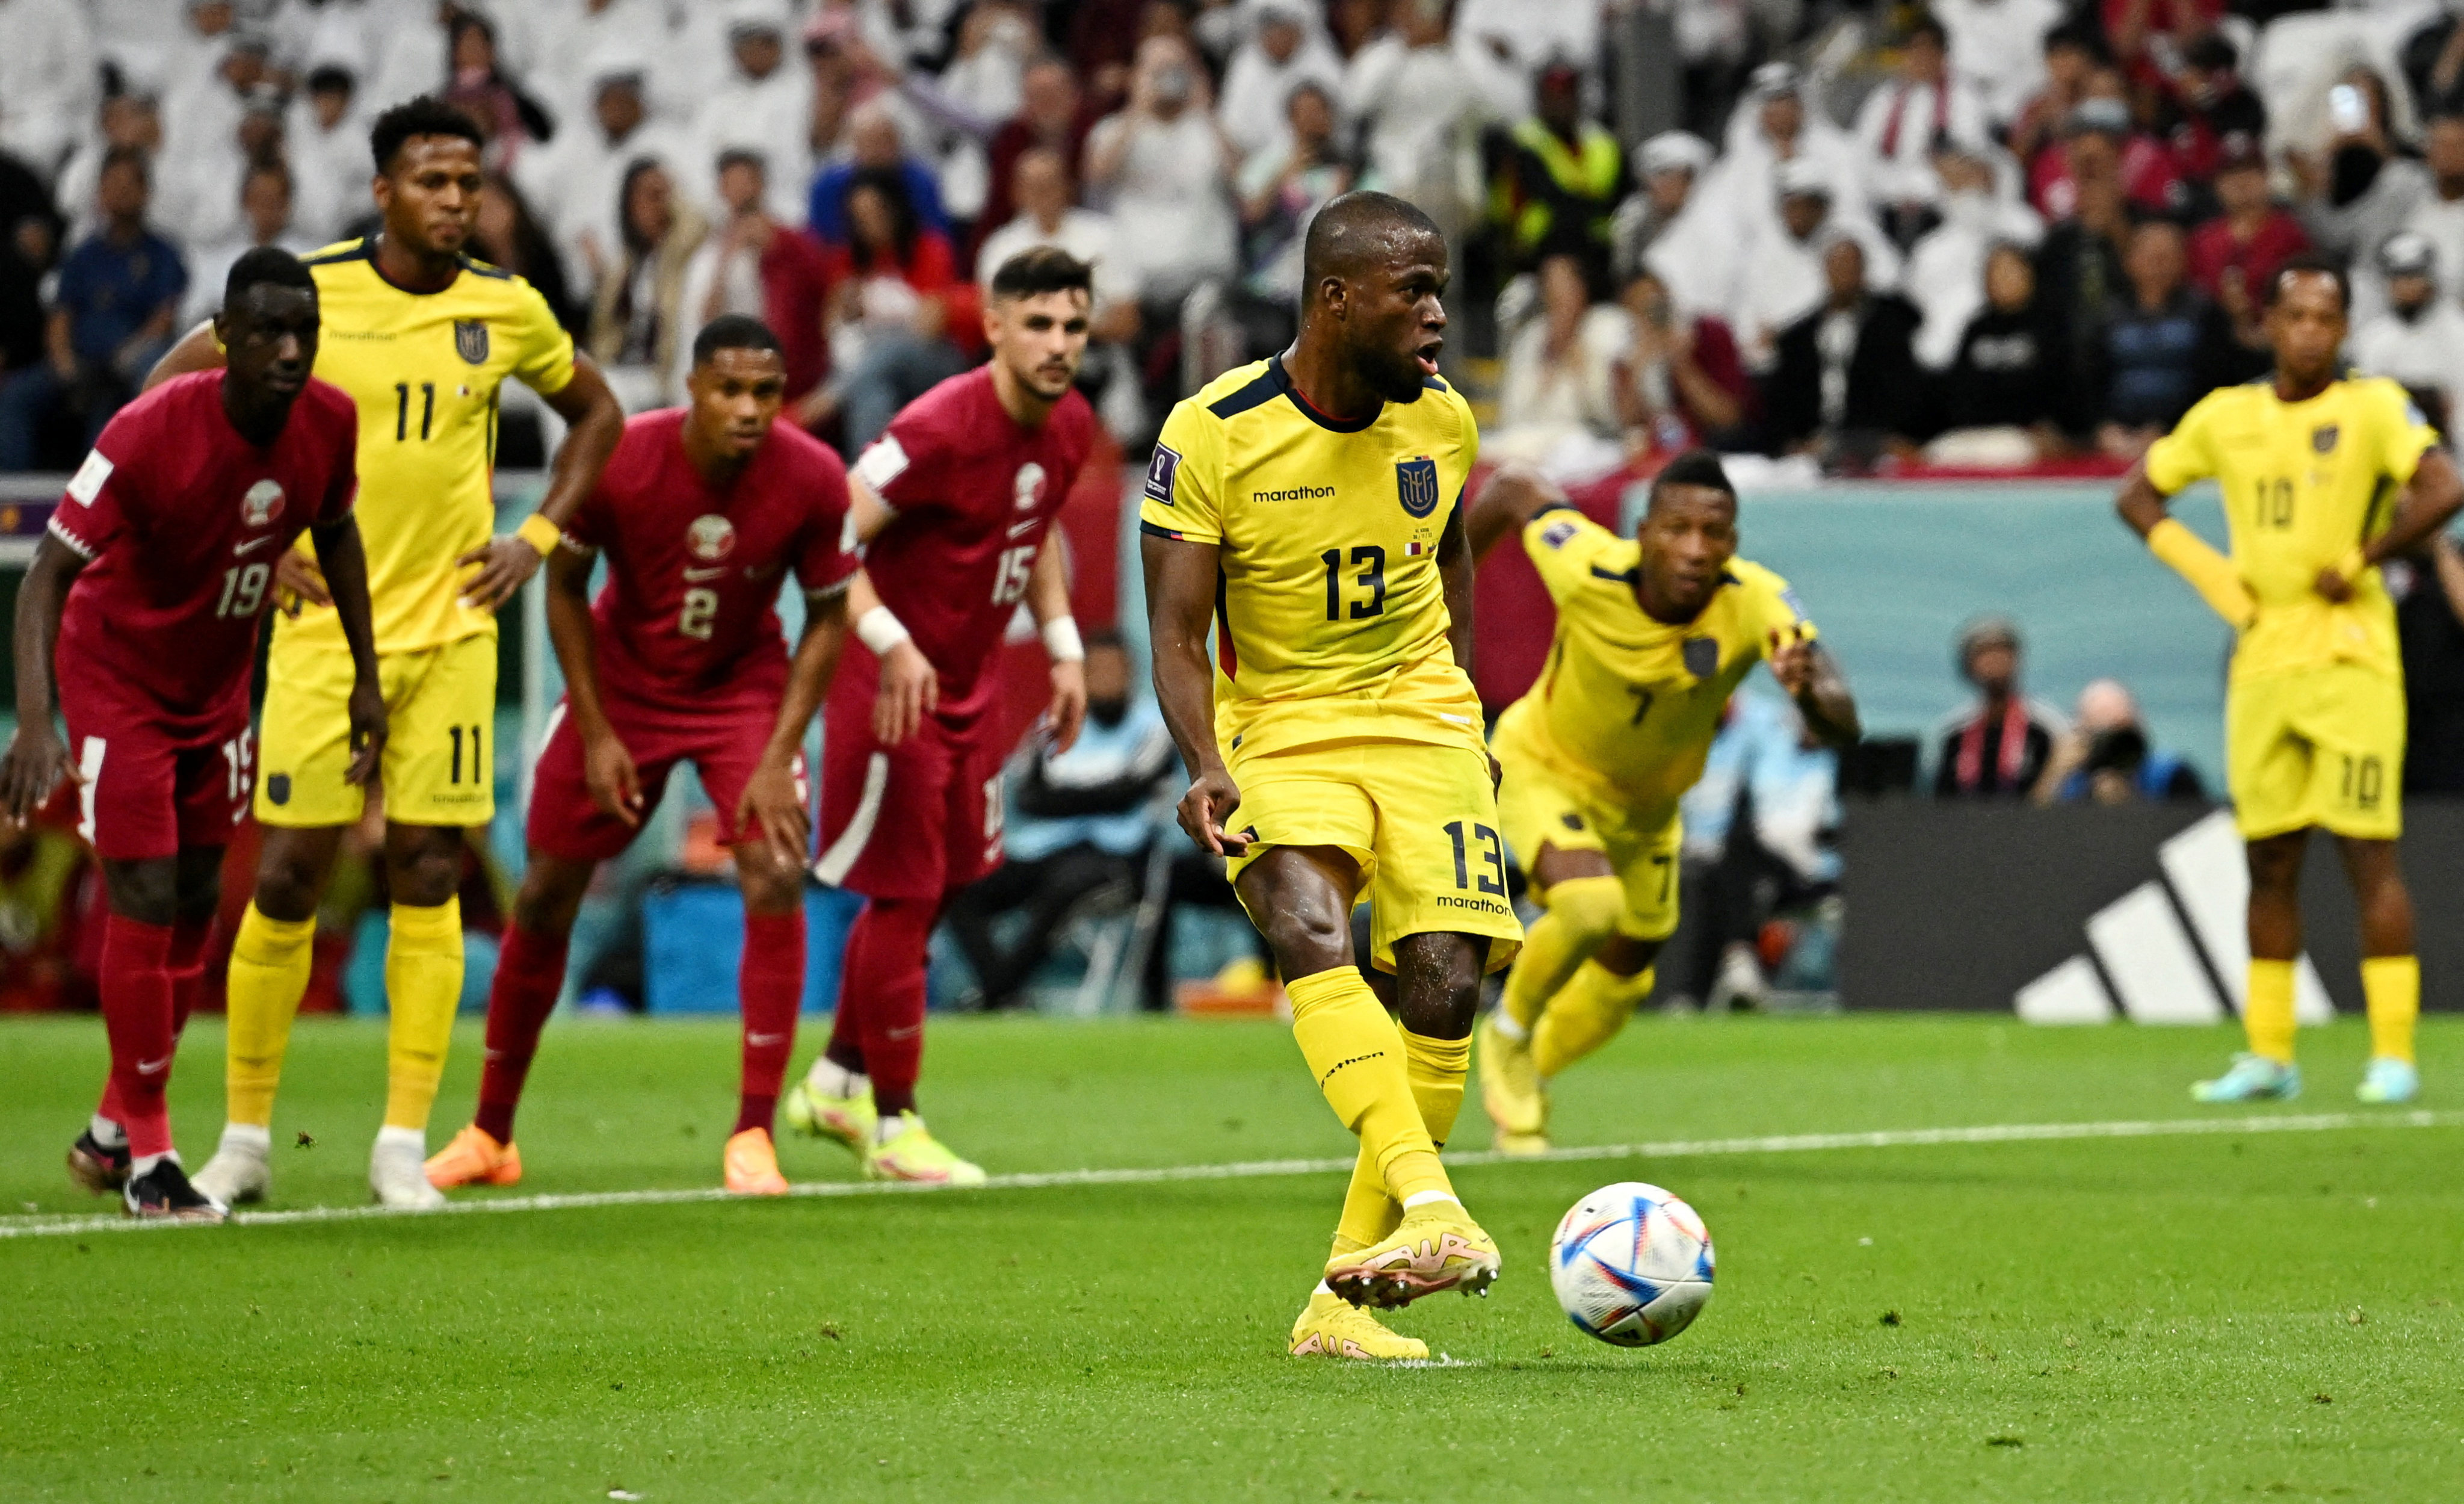 Ecuador’s Enner Valencia scores the first goal of the 2022 World Cup from the penalty spot. Photo: Reuters